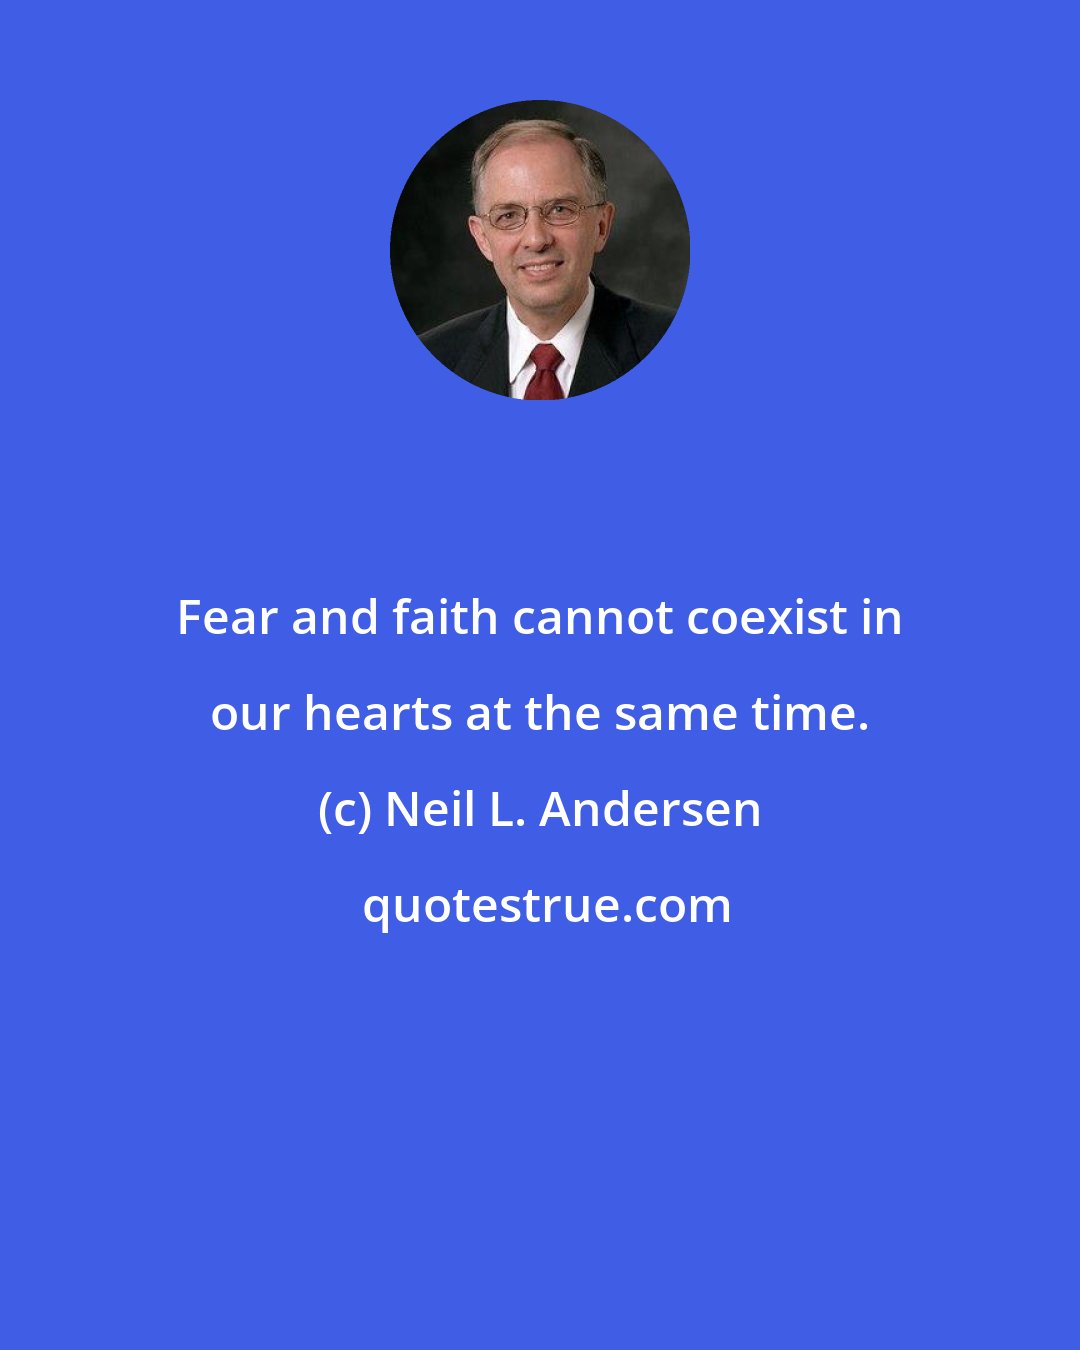 Neil L. Andersen: Fear and faith cannot coexist in our hearts at the same time.